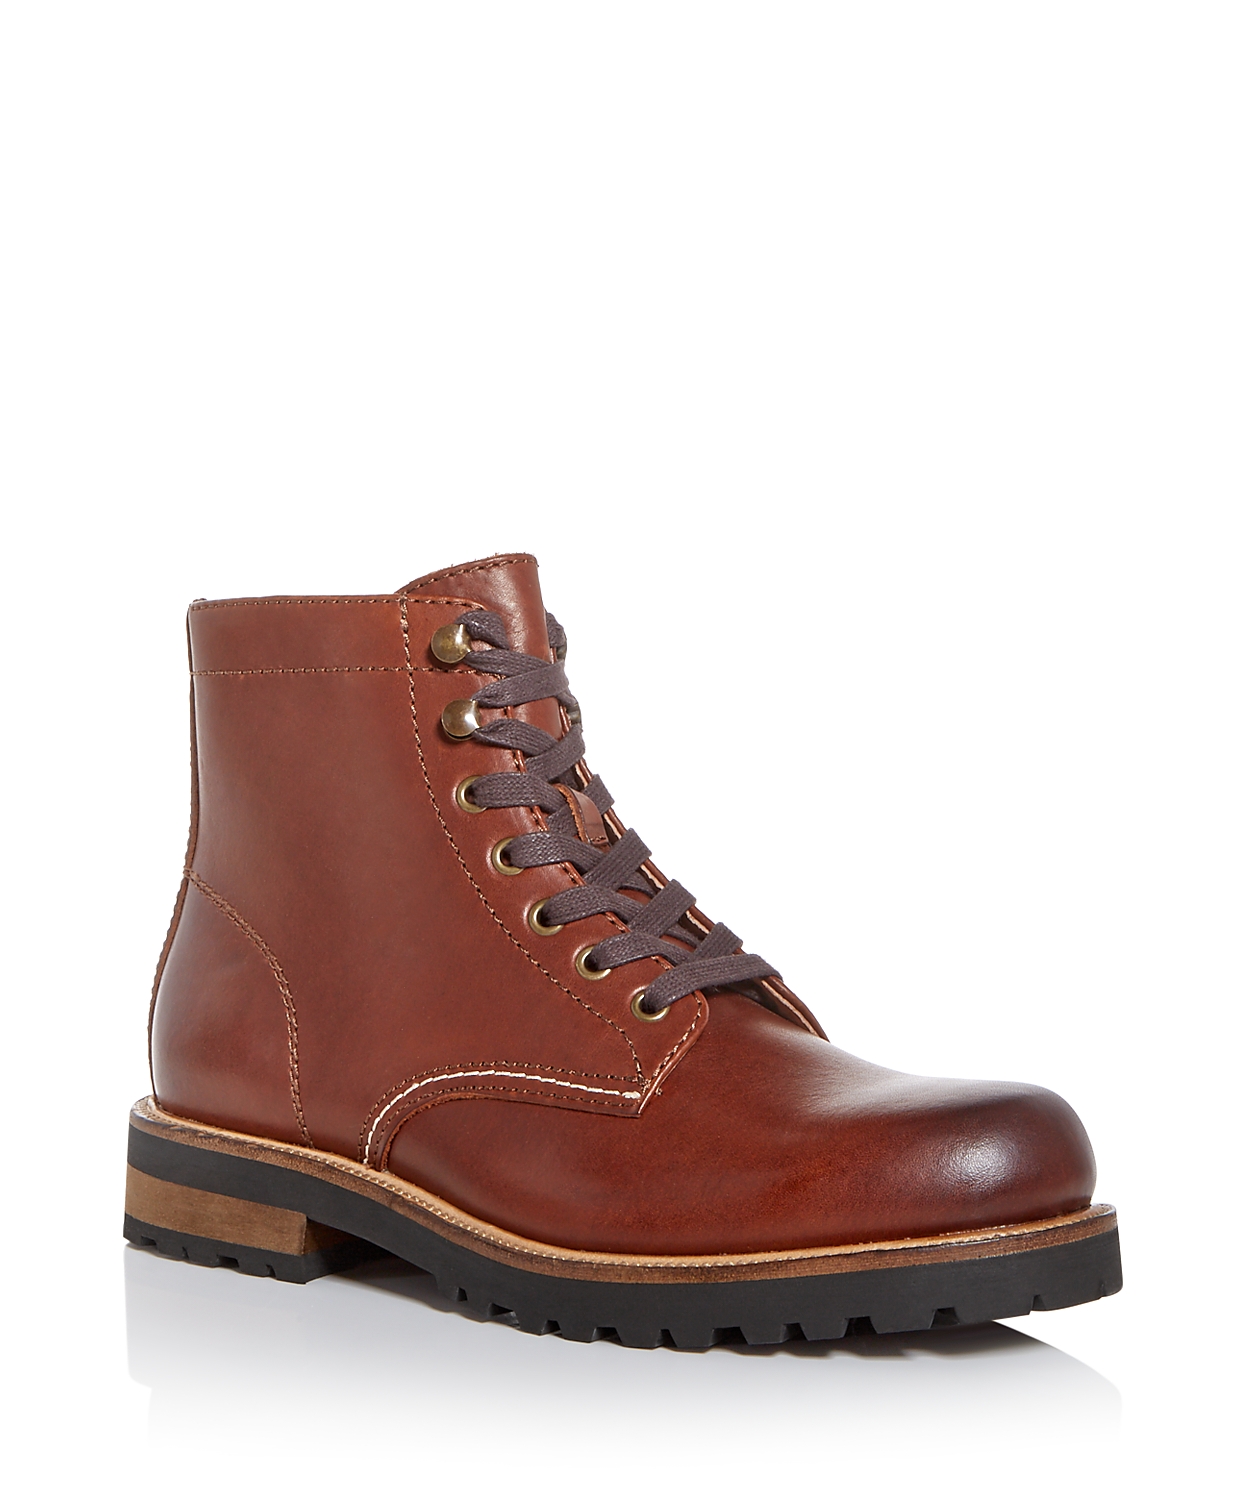 woocommerce-673321-2209615.cloudwaysapps.com-the-mens-store-mens-brown-leather-pierce-lug-sole-boots